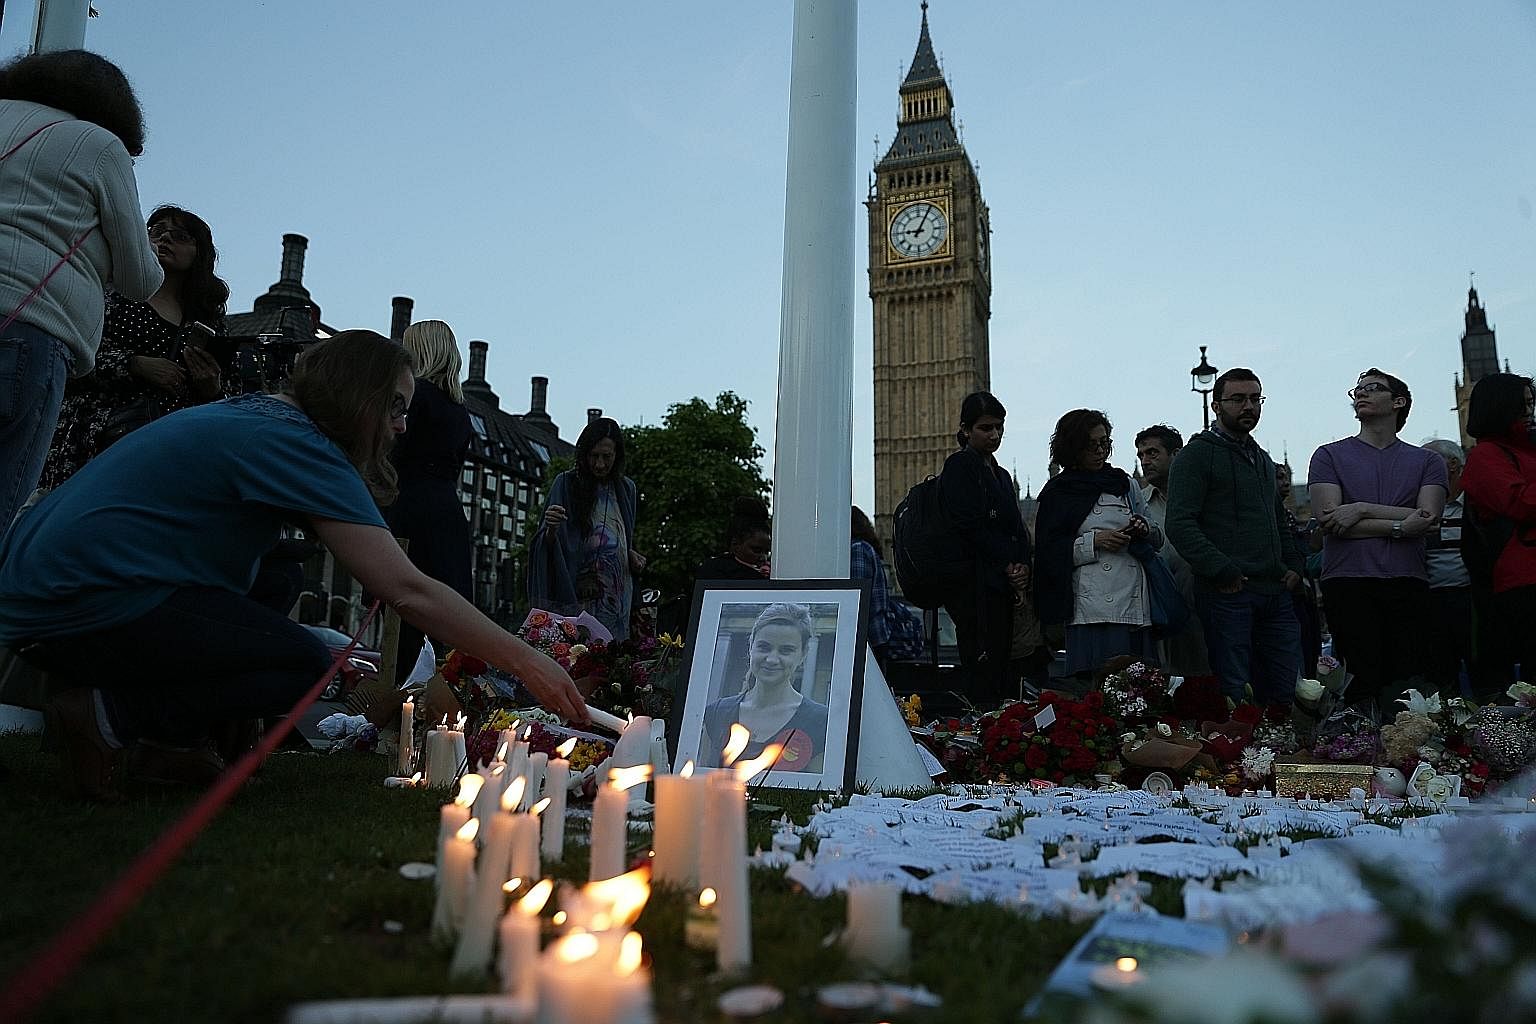 Tributes to slain MP Jo Cox in Parliament Square, London, last Friday. The Labour MP, who was killed in her constituency - Birstall - the day before, had been a fervent supporter of immigration and had campaigned for Britain to remain in the EU. Her 